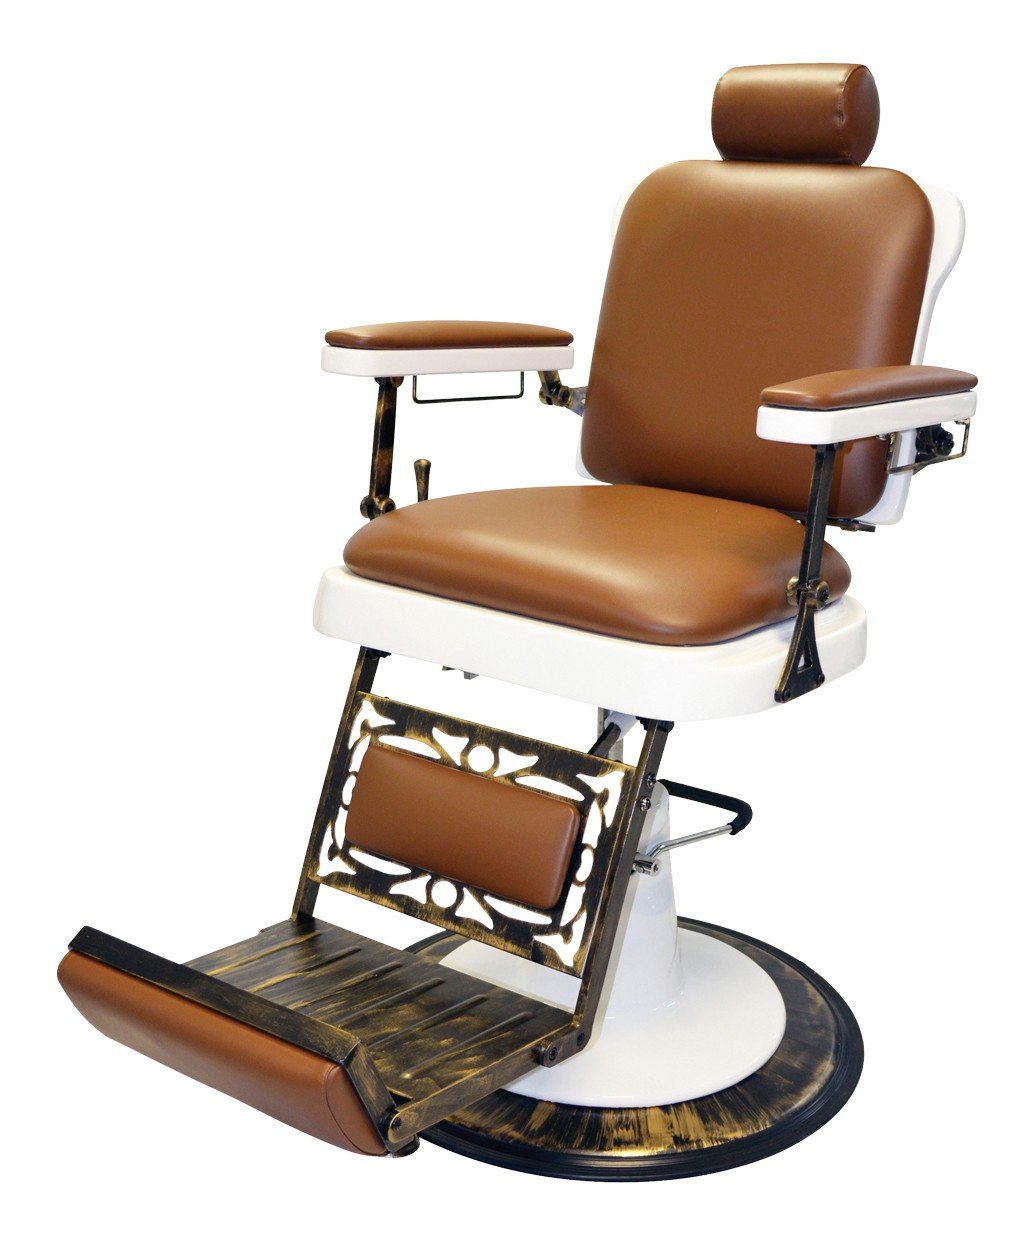 Classic Antique Barber Chair Pibbs 662 King Barber Chair